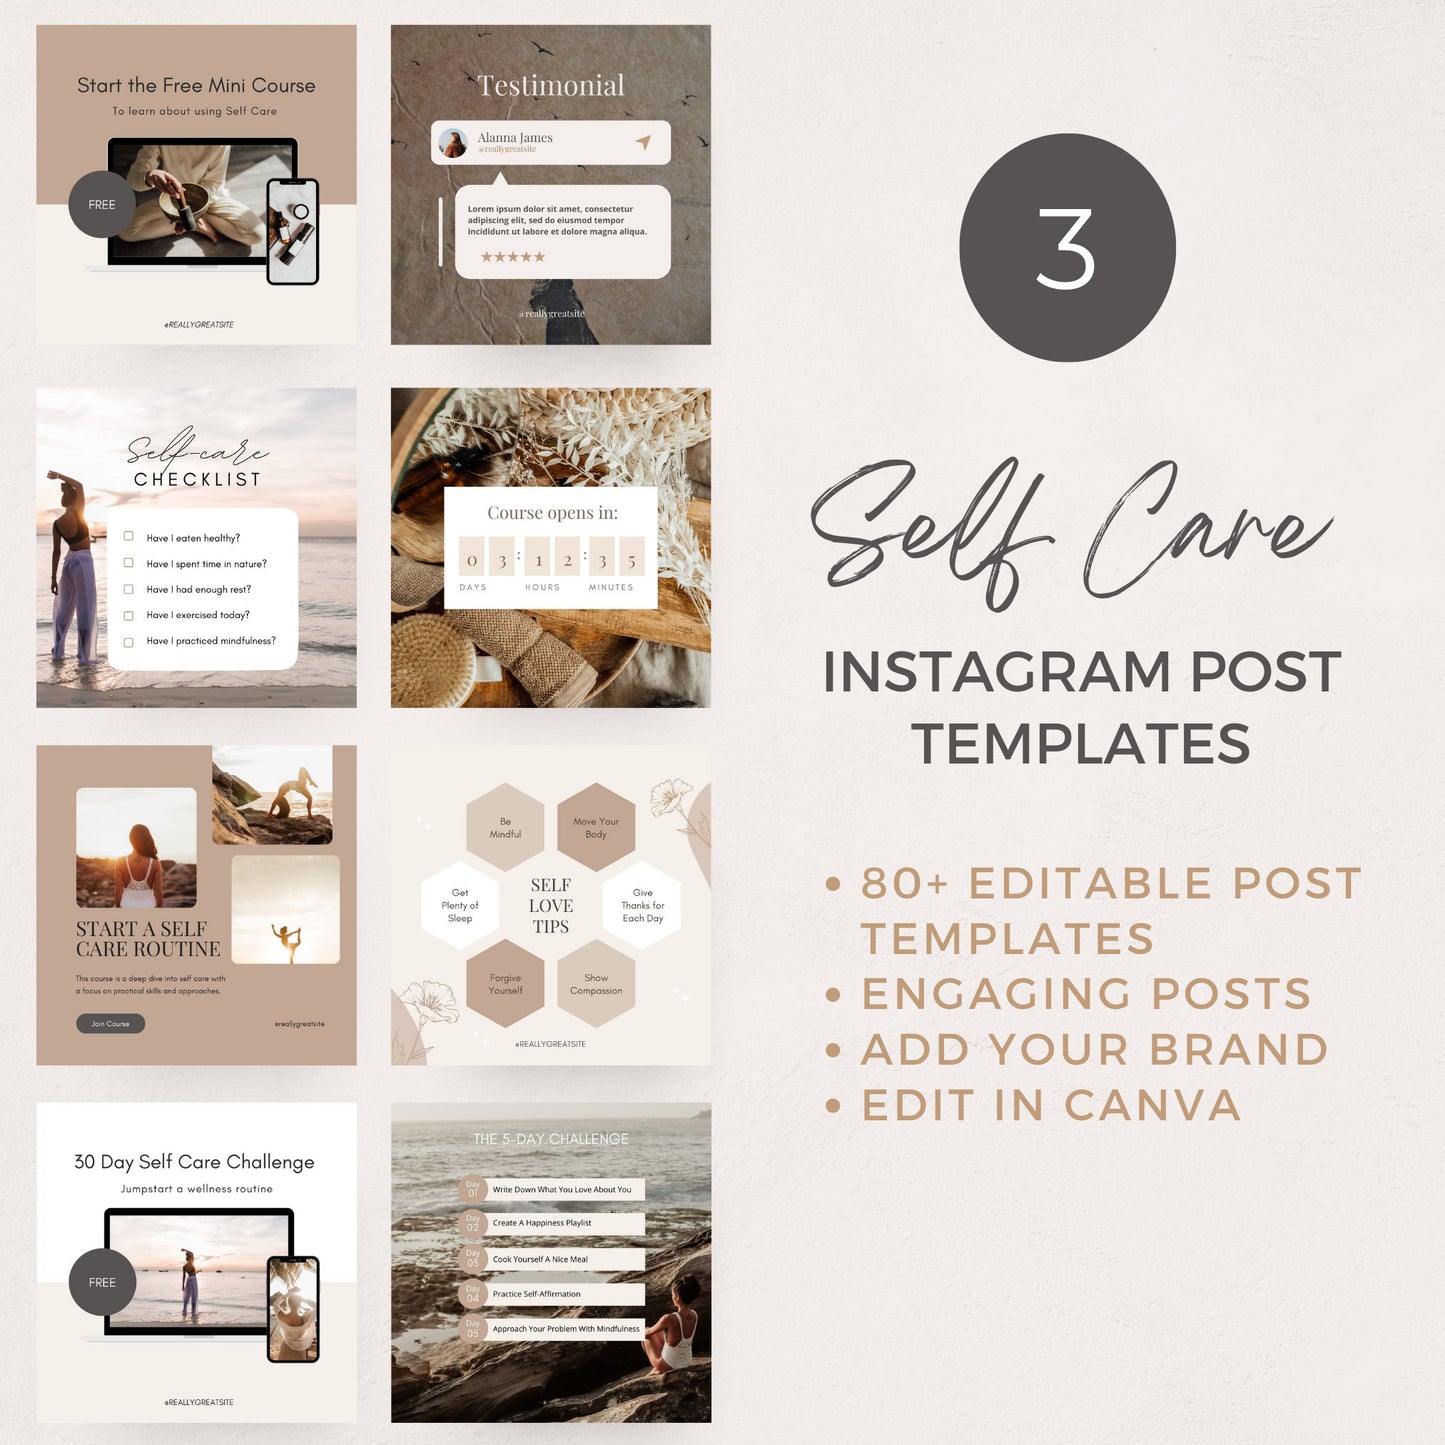 Self Care Product Creator Bundle | Editable Canva Templates to easily create a Self Care Challenge Planner Journal Workbook, Card Deck and Instagram Social Media Posts. Perfect for life wellness spiritual coach practitioner. 

Coachtemplate.com CT040